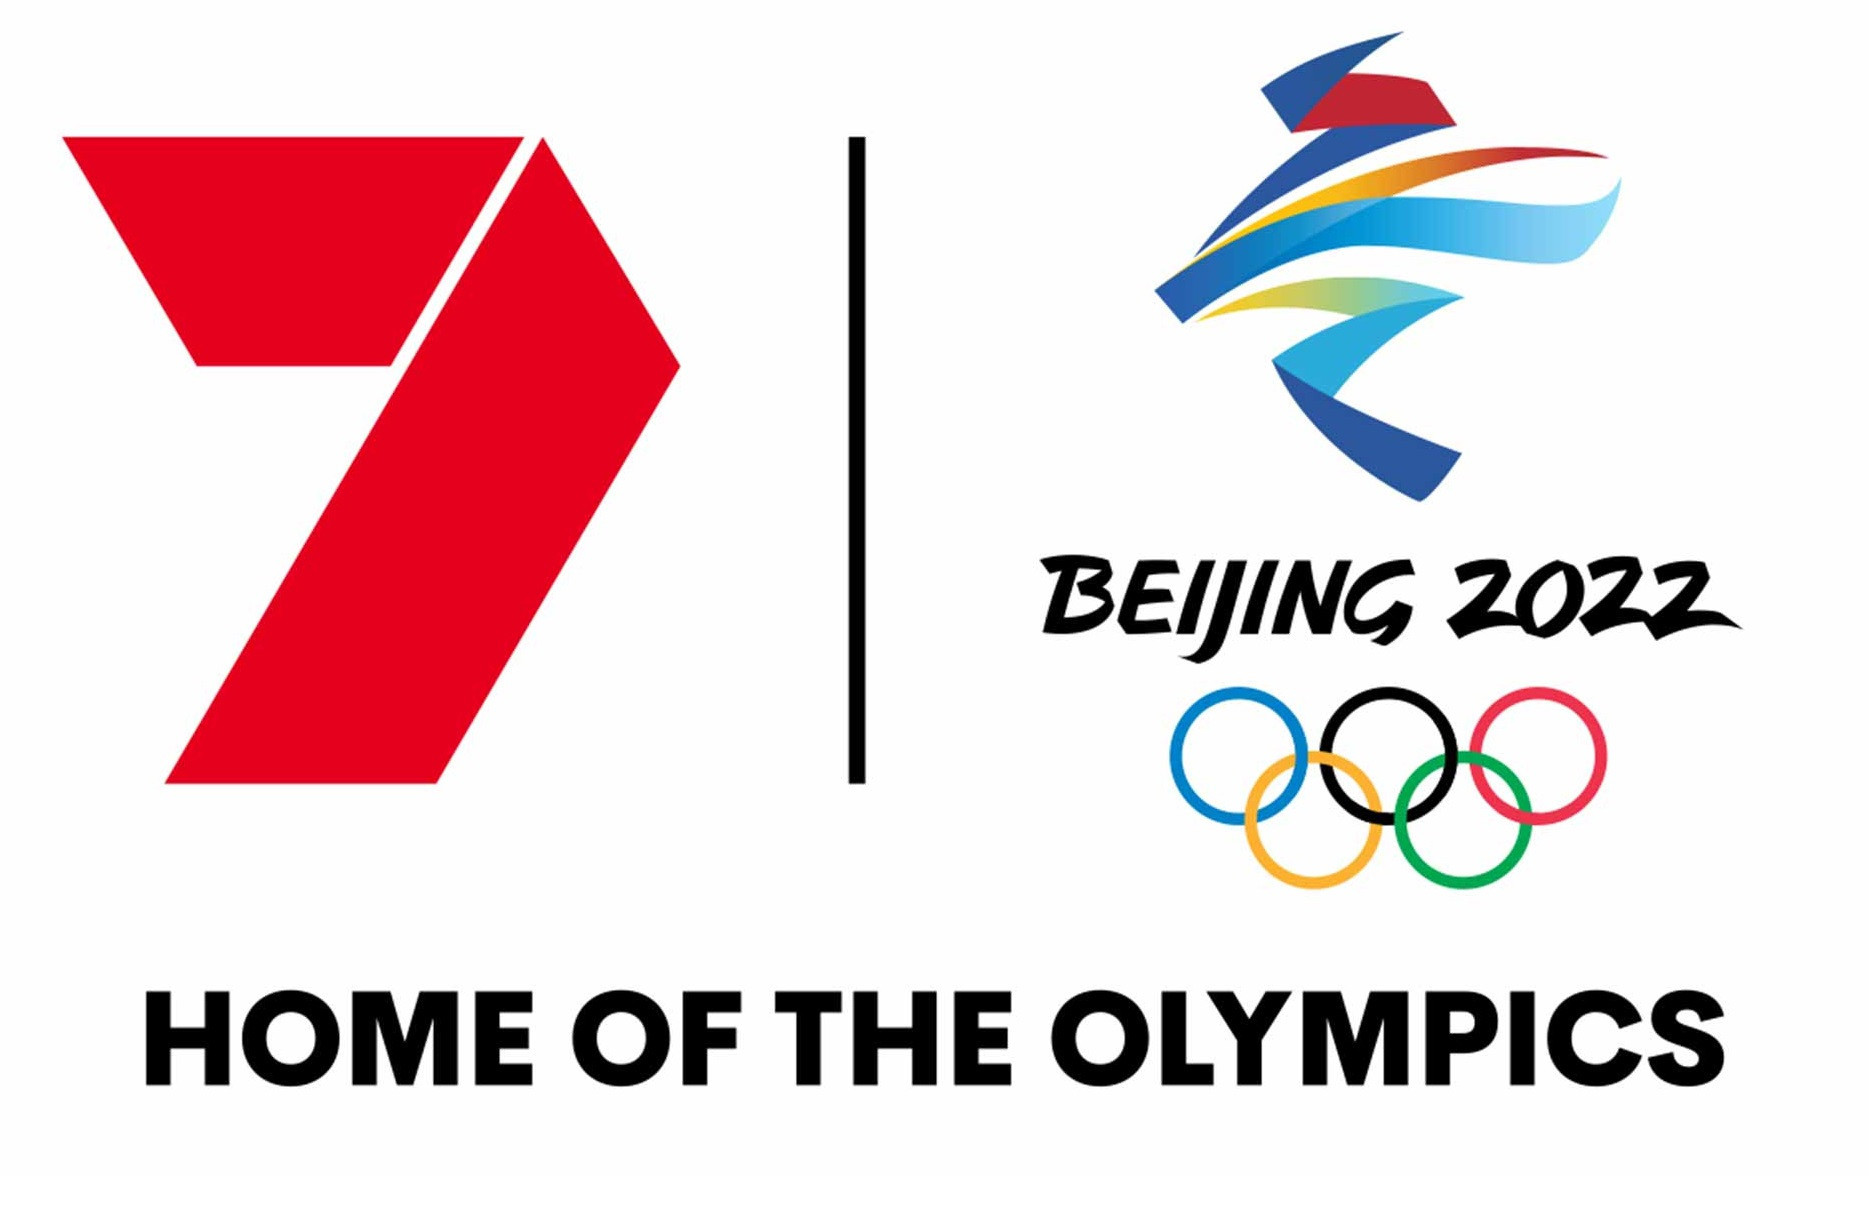 Seven Network secures Australian TV rights for Beijing 2022 as IOC extends agreement